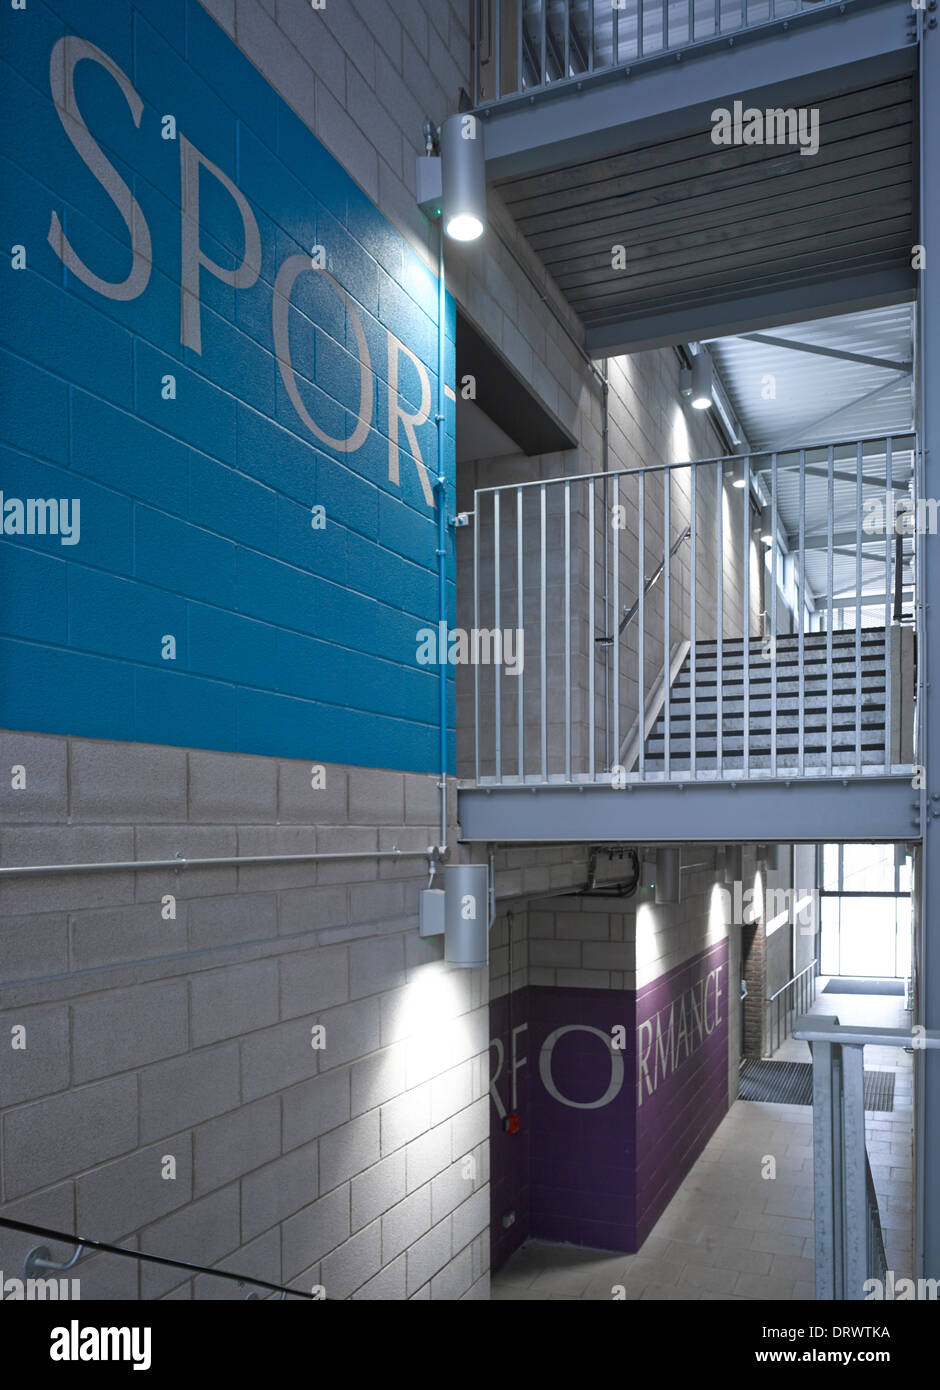 St Thomas the Apostle College, London, United Kingdom. Architect: Allies and Morrison, 2013. Link staircase. Stock Photo